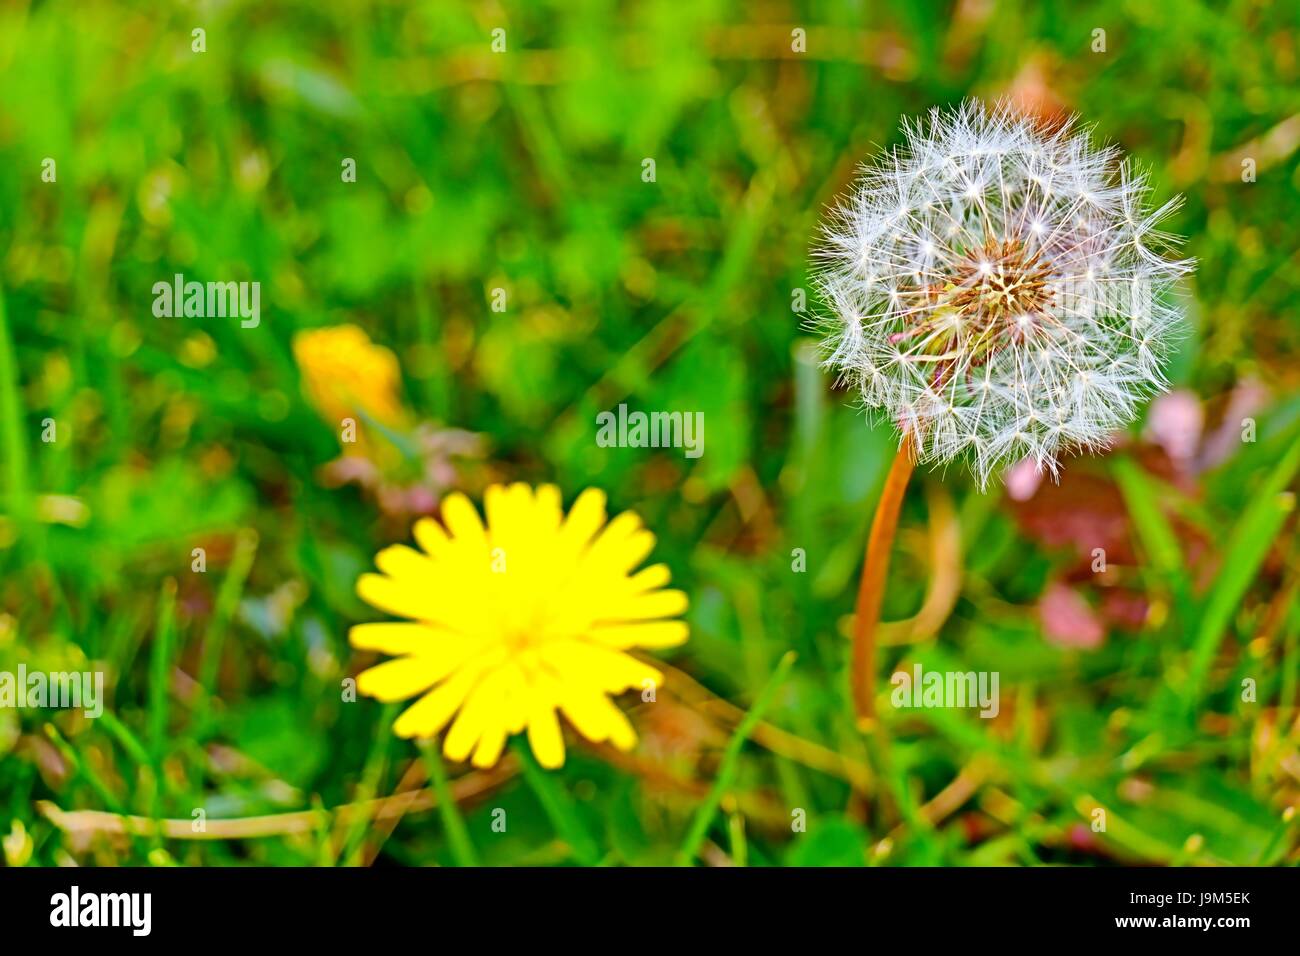 Dandelion flower and seed head composed in a single image. Stock Photo